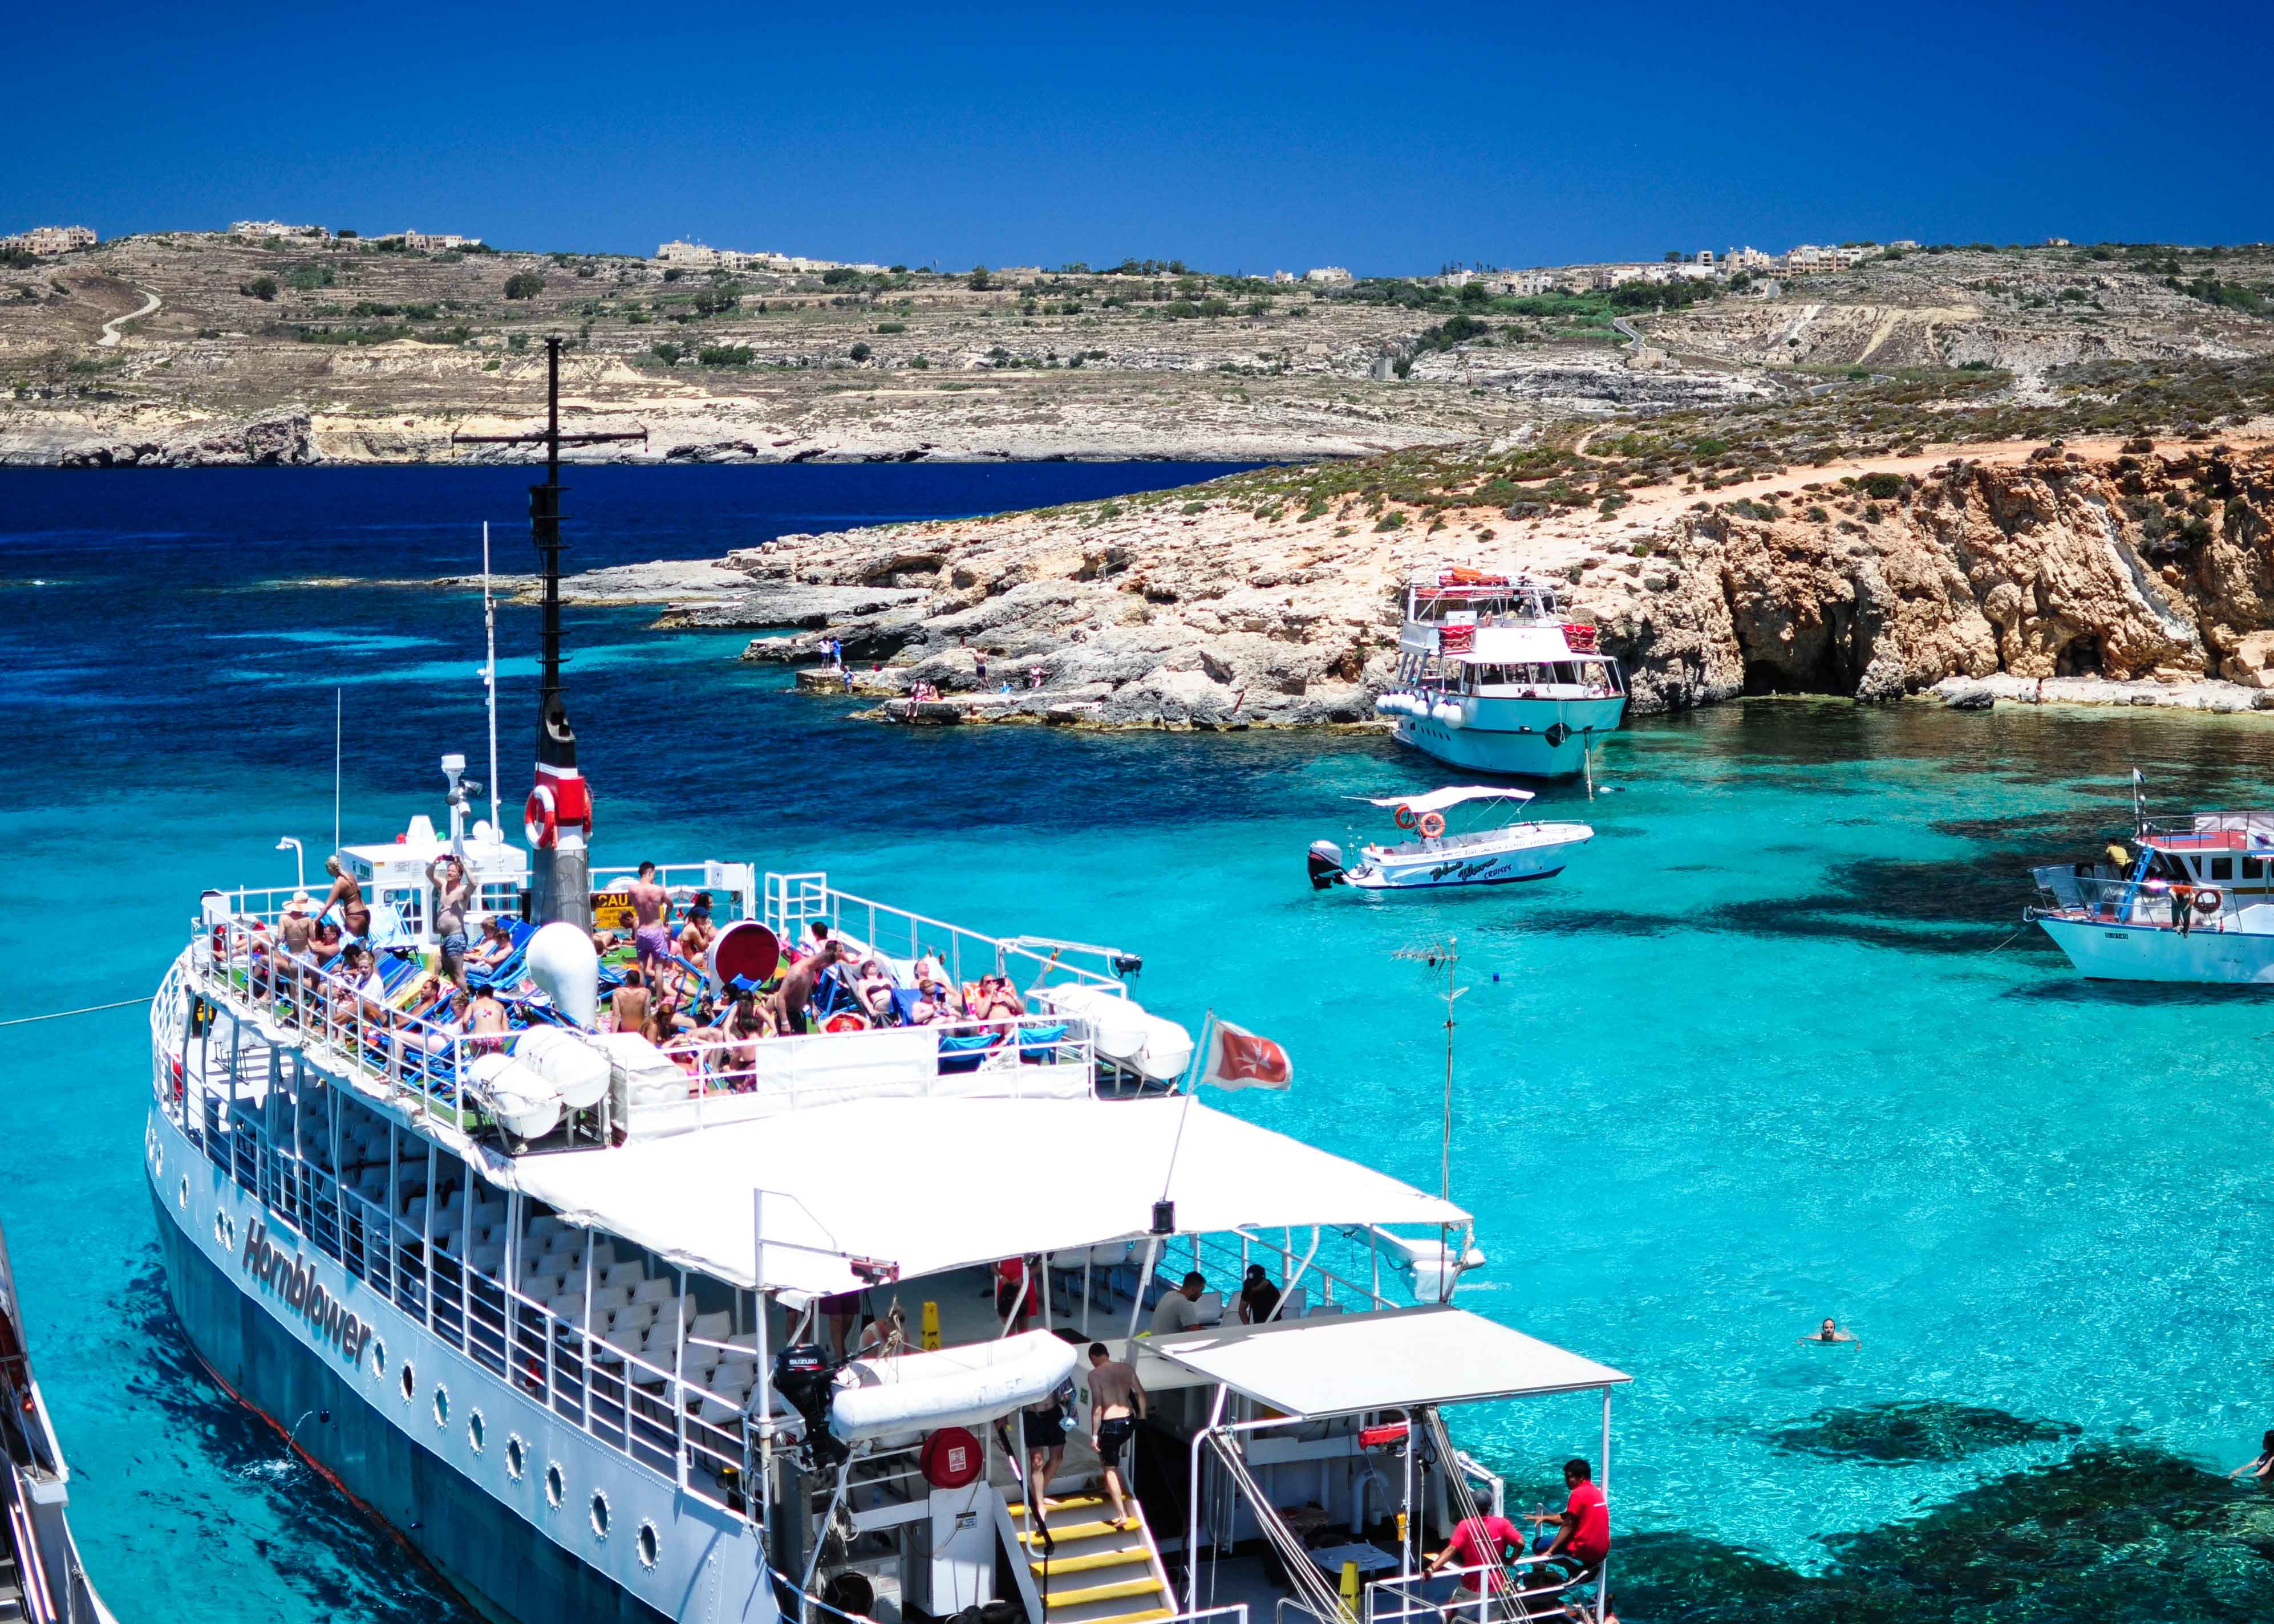 The best place to spend summer in Europe, Blue Lagoon, Malta